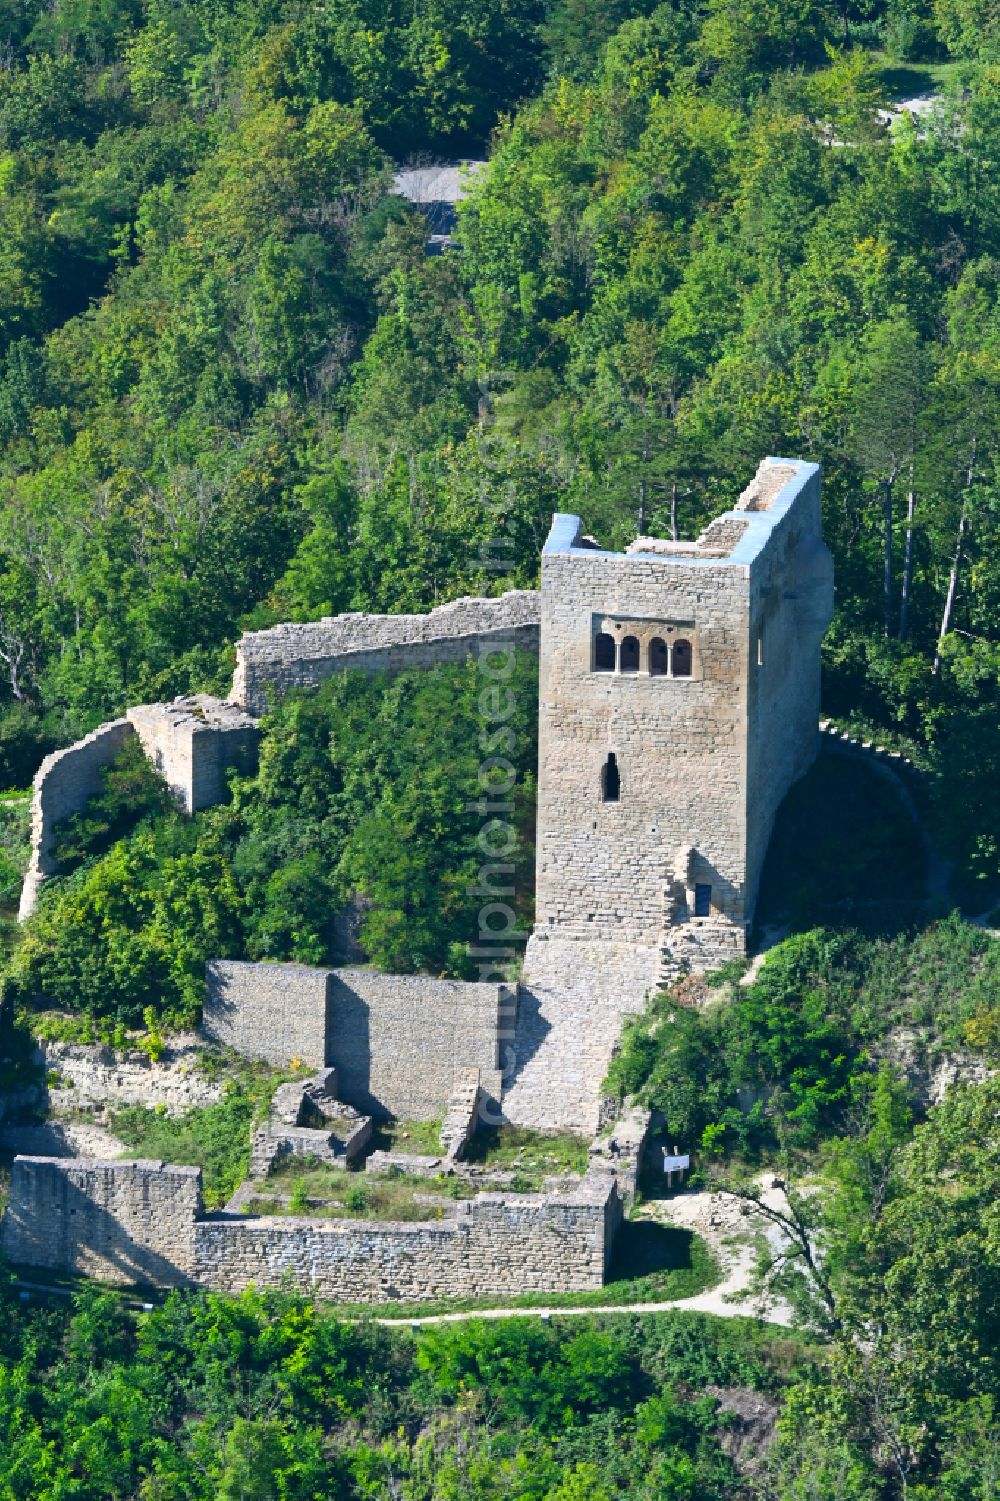 Aerial image Jena - Ruins and vestiges of the former castle Lobdeburg on street Lobdeburgweg in Jena in the state Thuringia, Germany